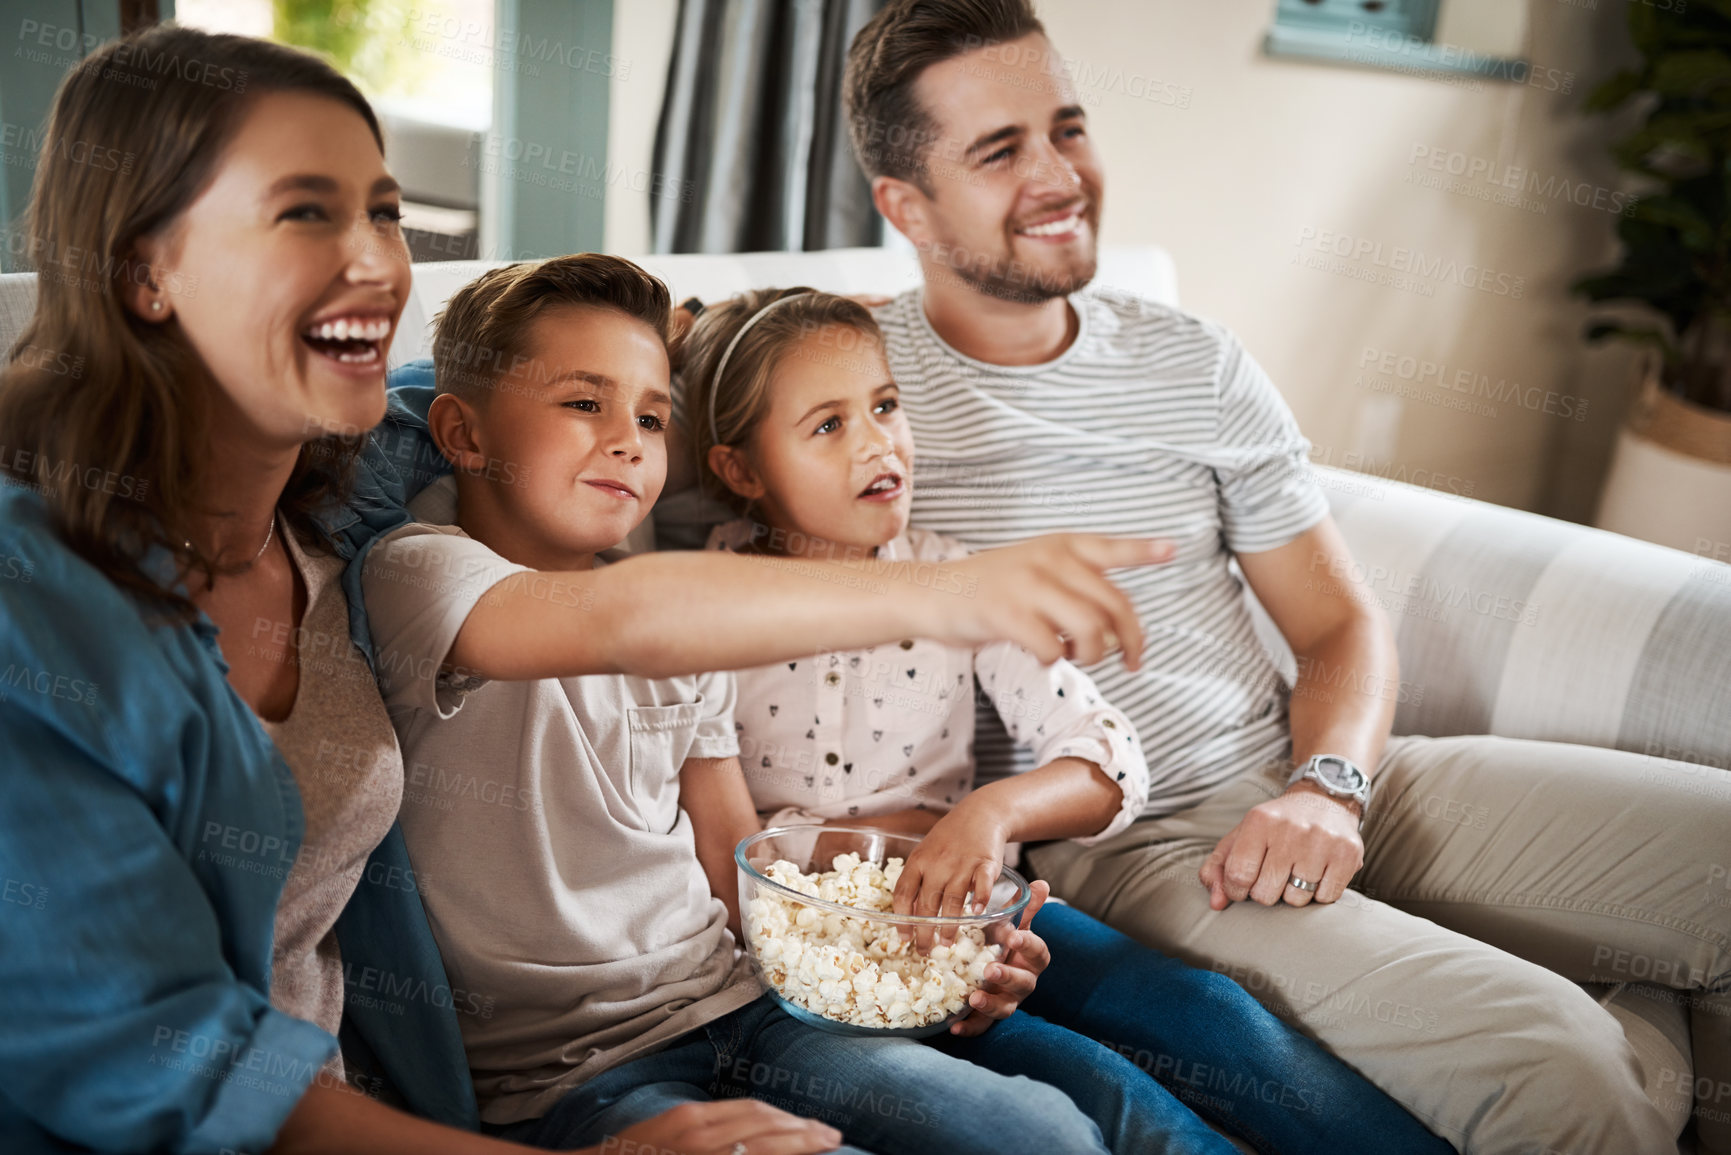 Buy stock photo Shot of a happy young family relaxing on the sofa and watching tv together at home